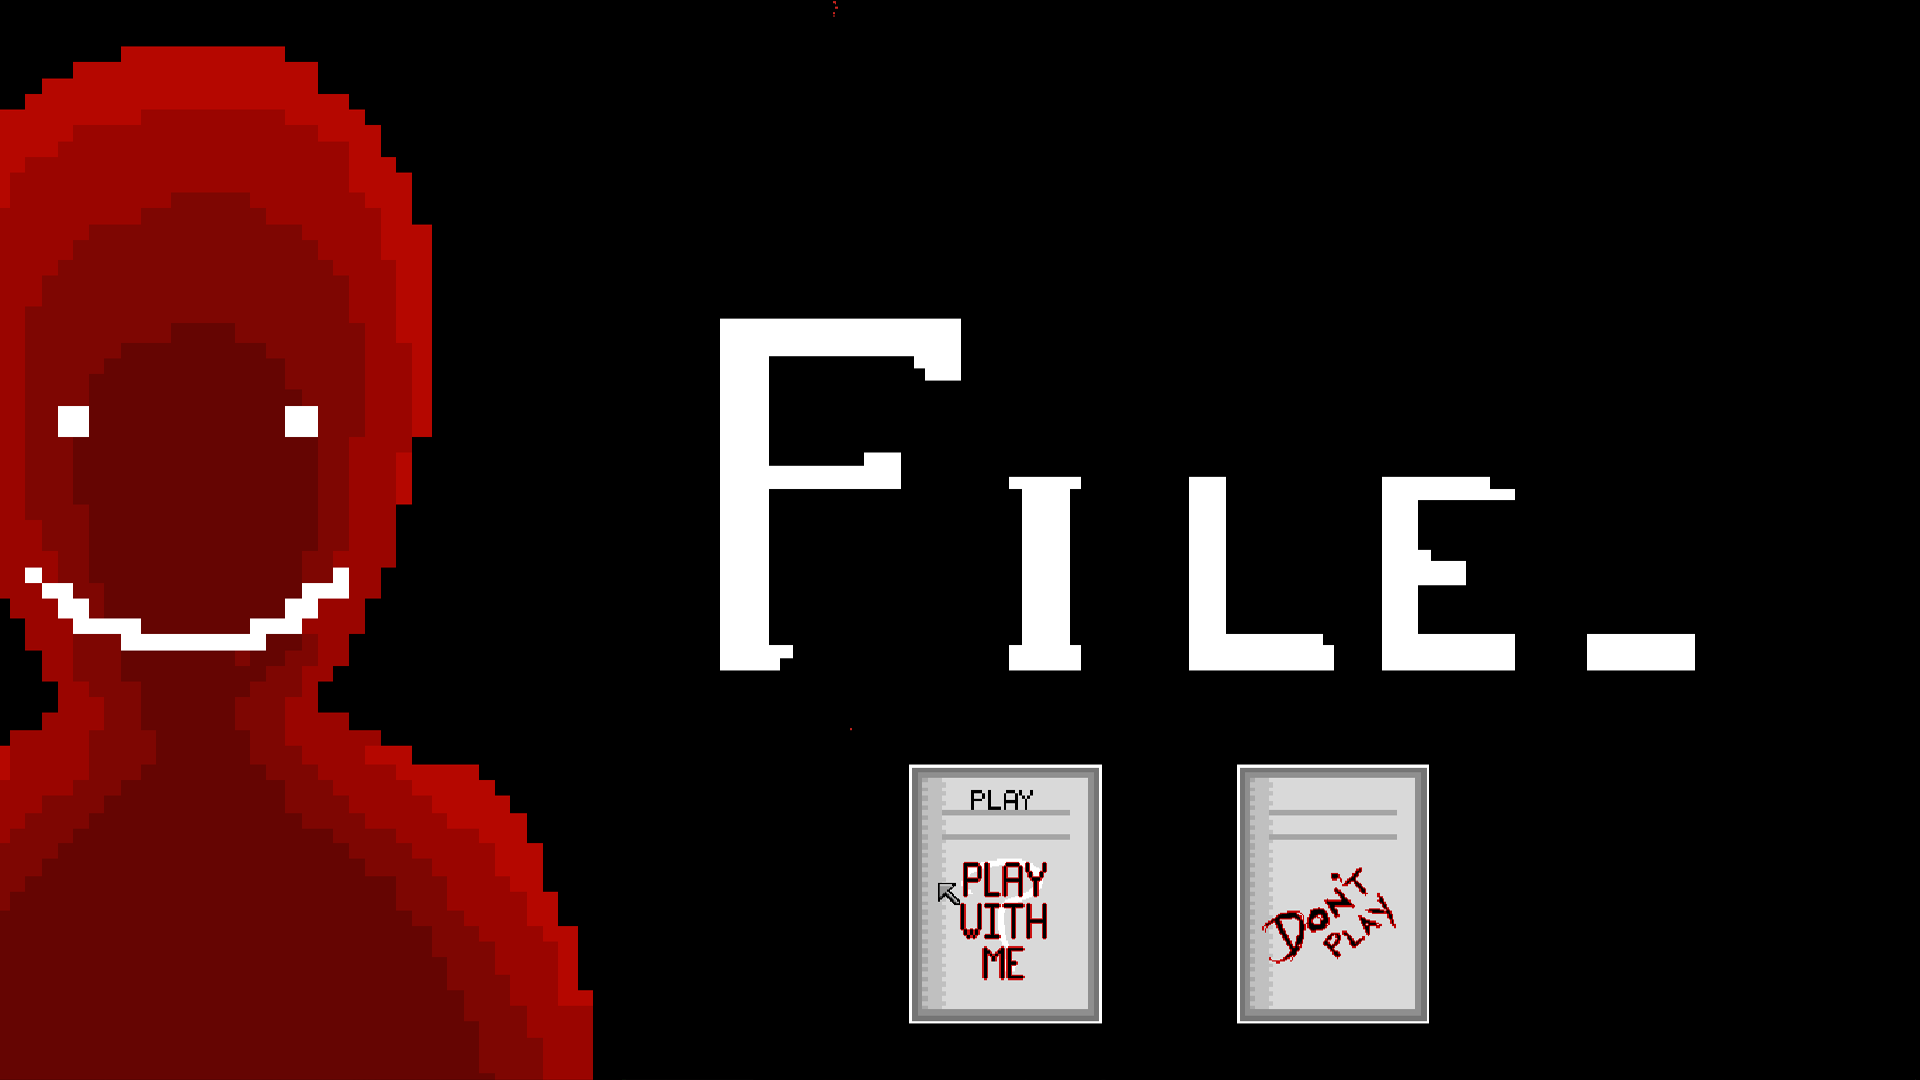 Game html file game. Exe файл. Картинка exe файла. File.exe игра.